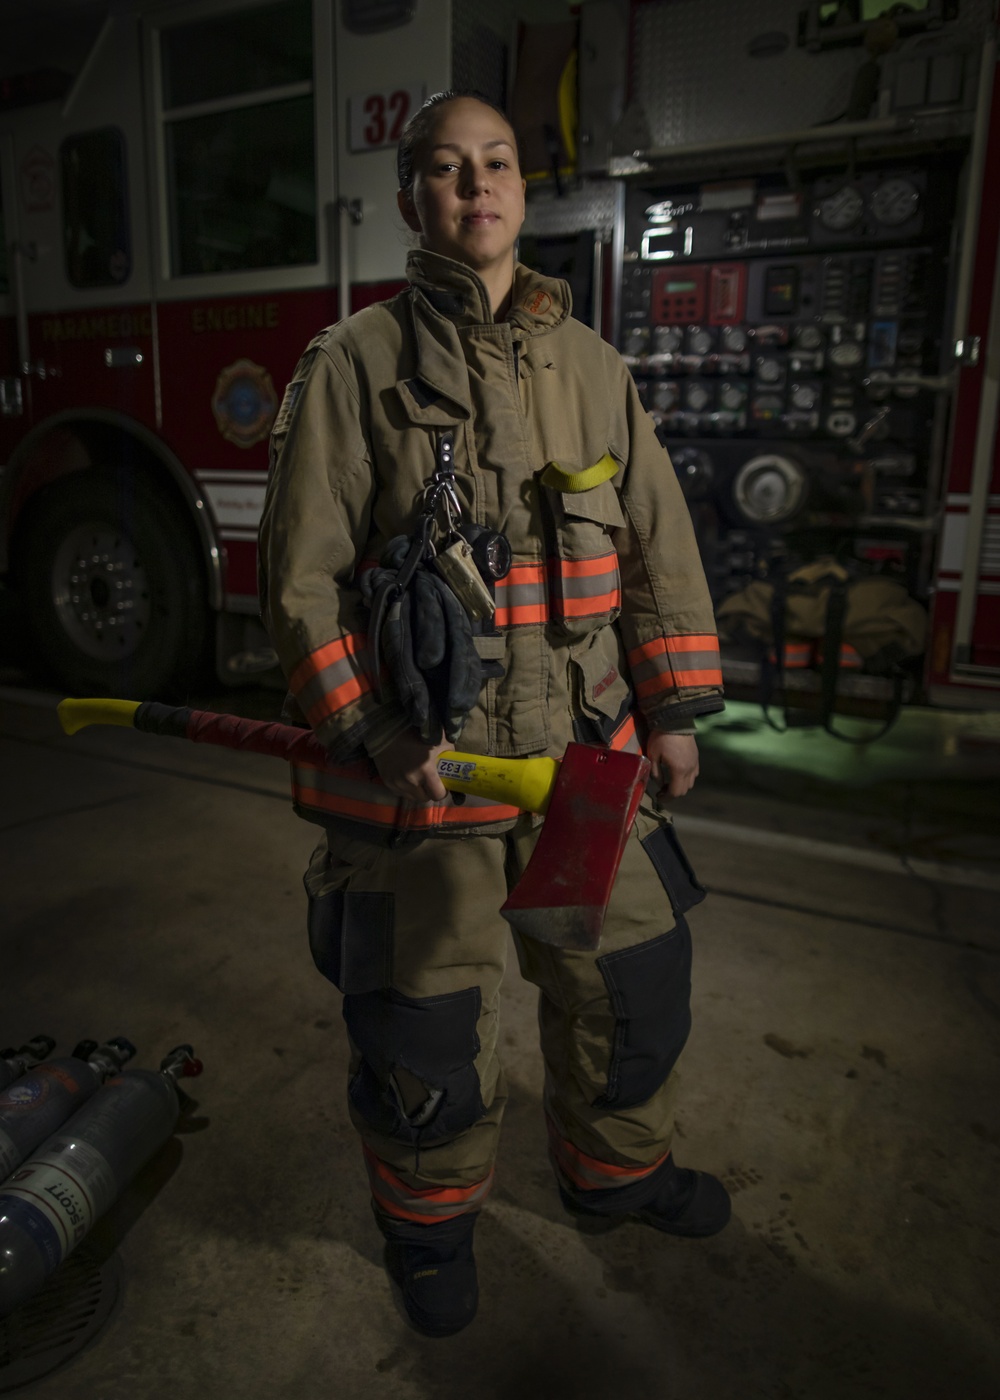 Out of the Army, into the fire: Fort Carson first responder serves in more ways than one